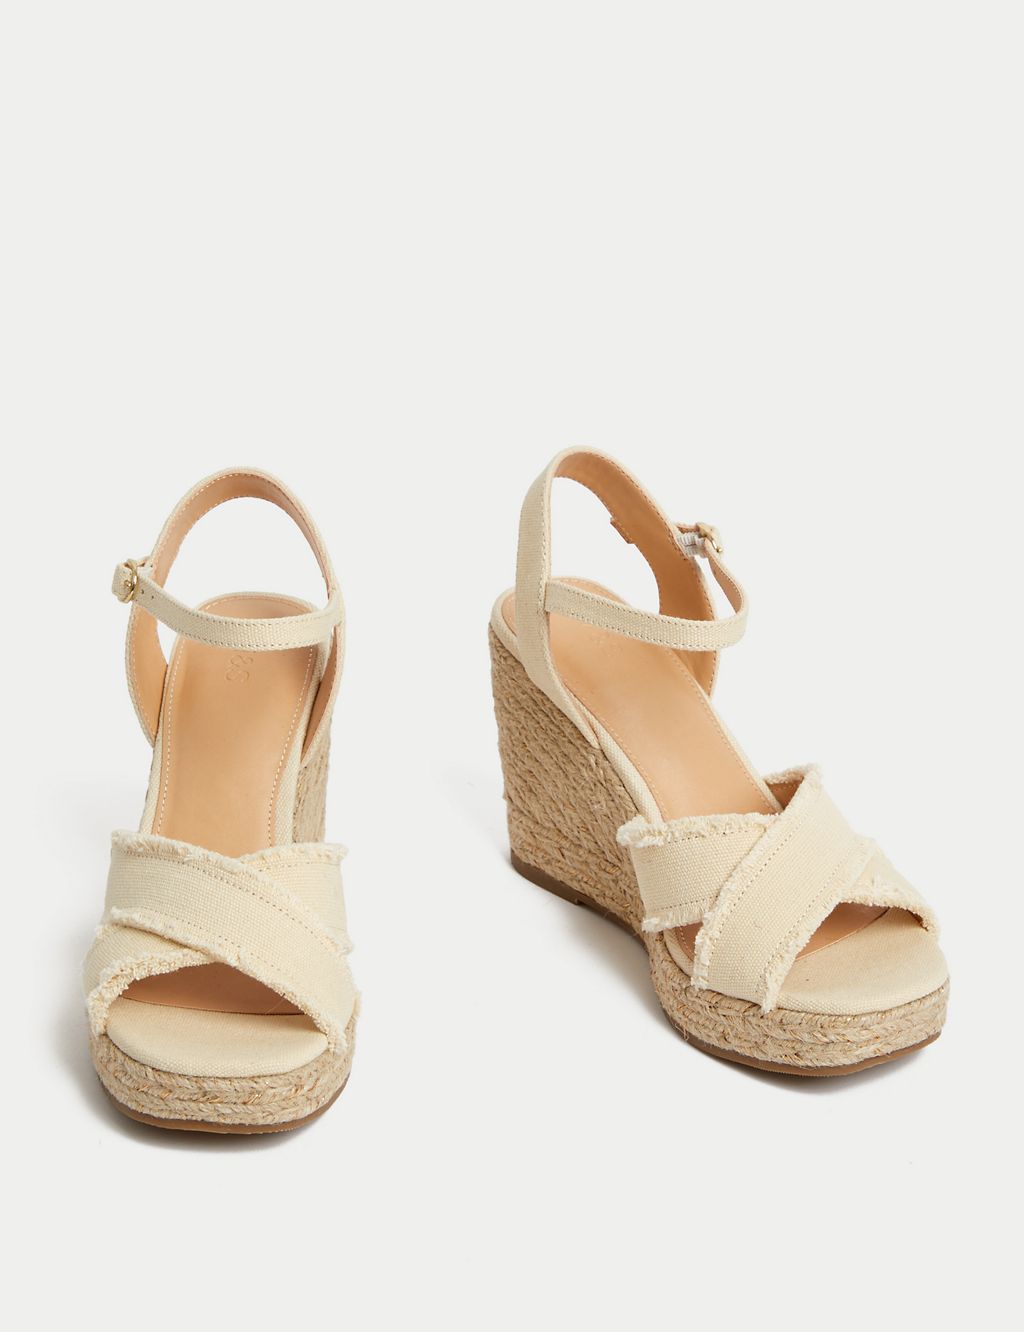 Canvas Buckle Wedge Espadrilles 1 of 3